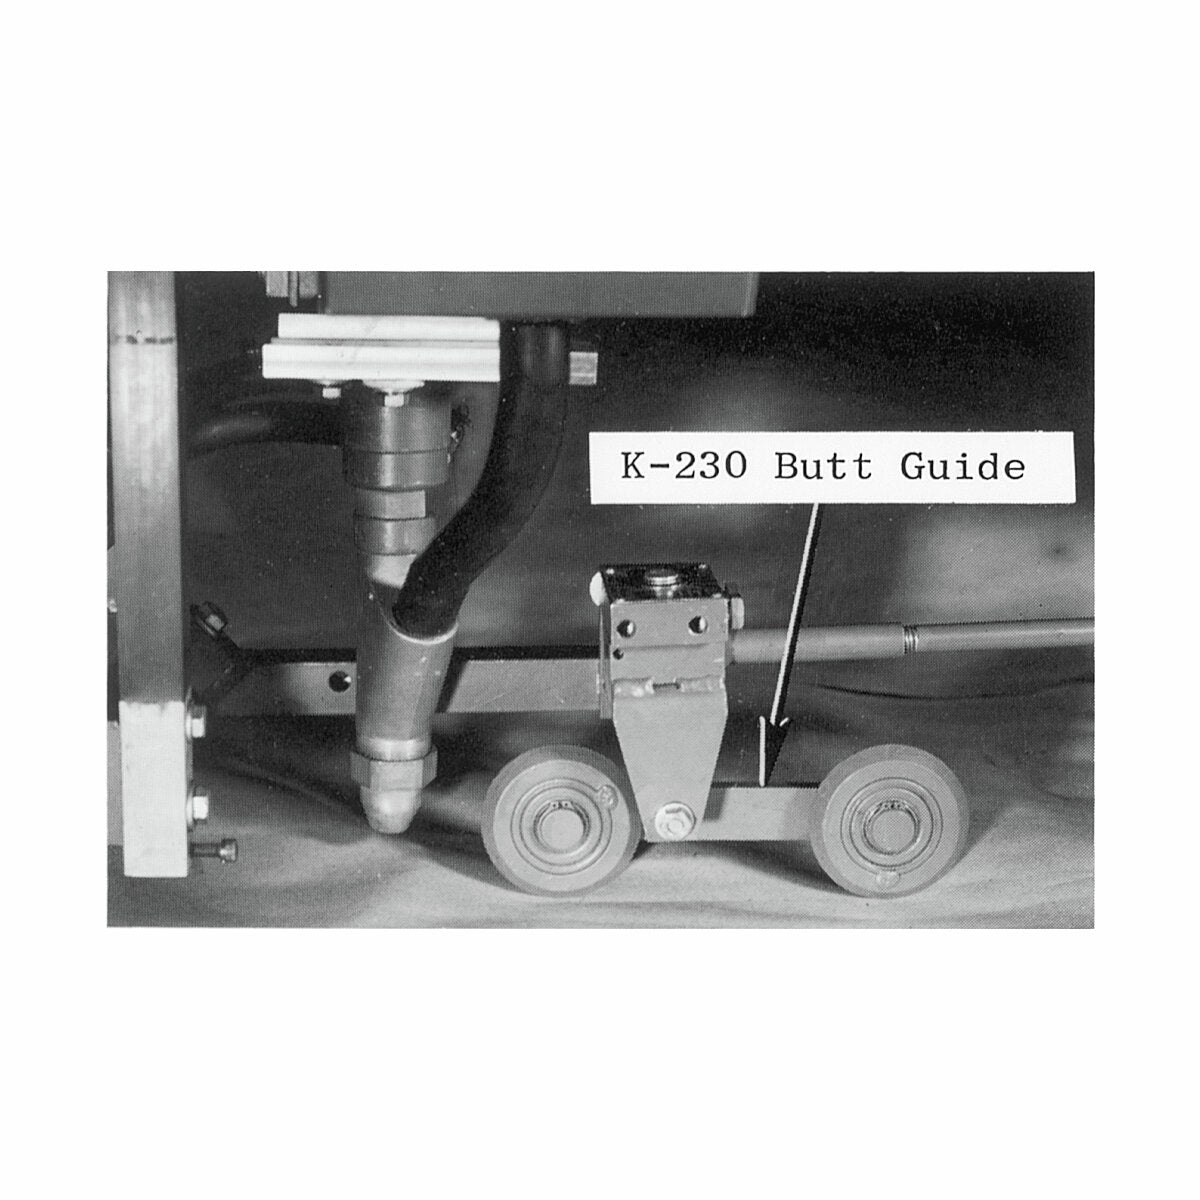 Lincoln Electric - Butt Seam Guide Kit - K230